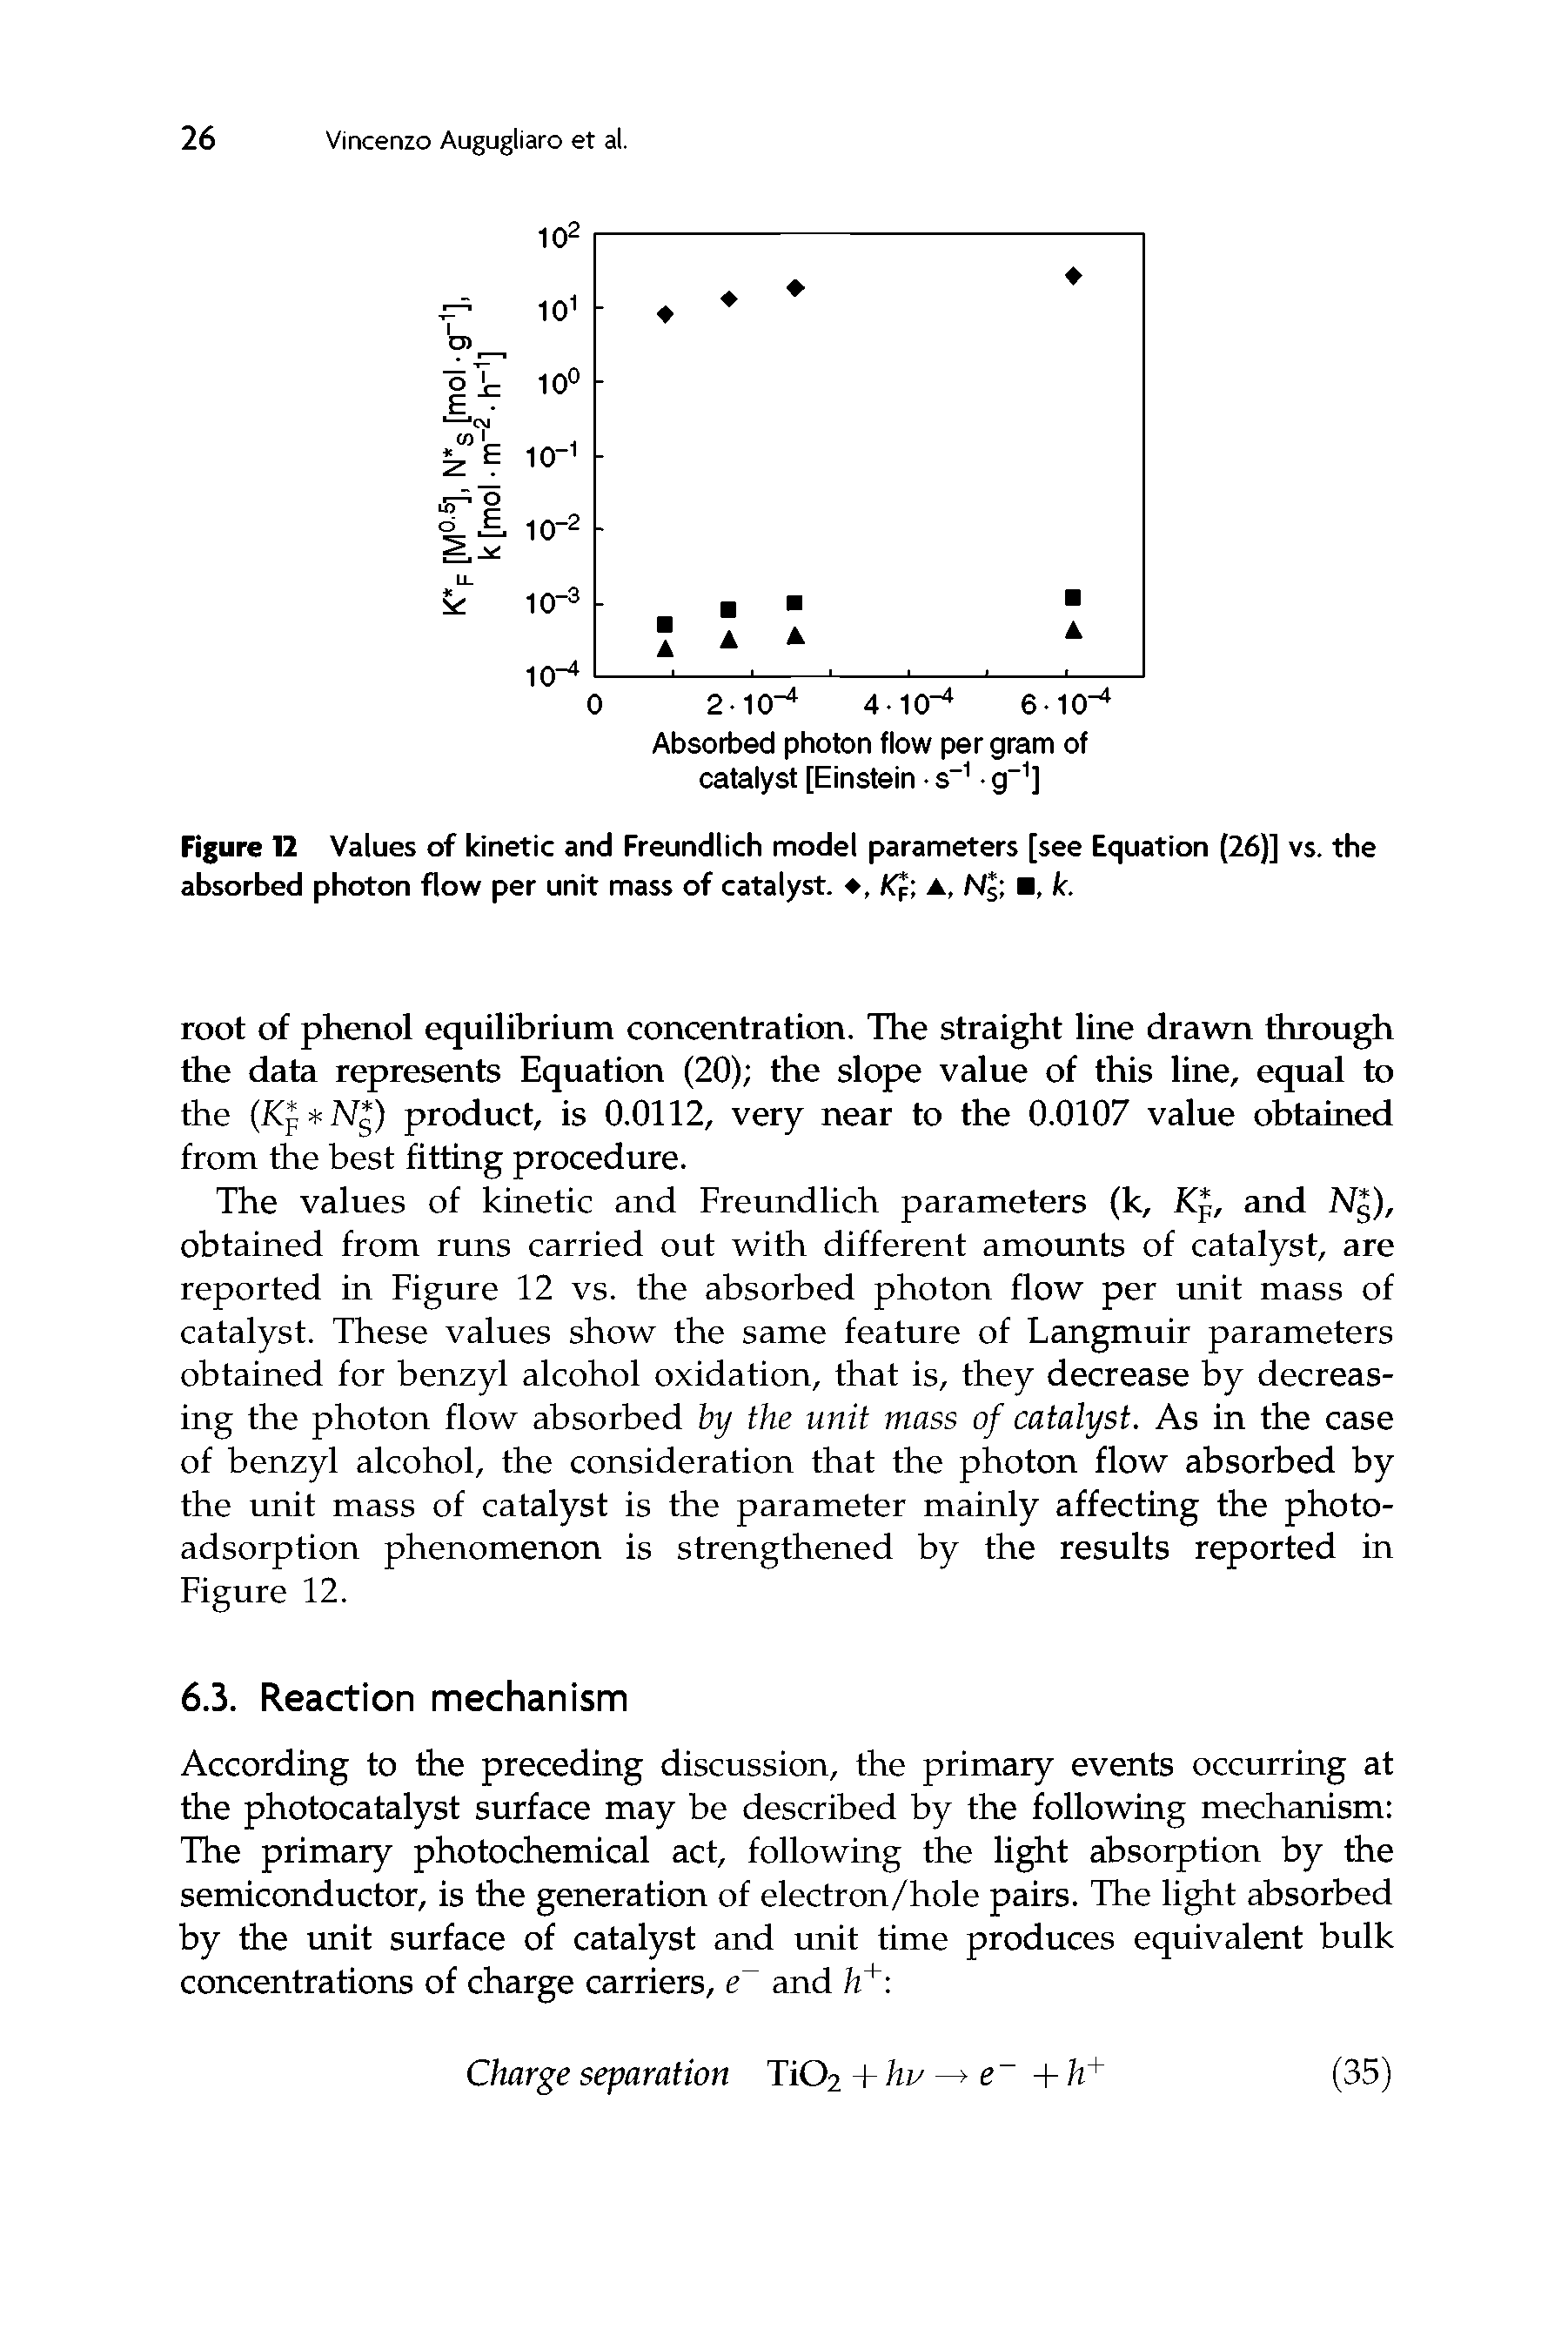 Figure 12 Values of kinetic and Freundlich model parameters [see Equation (26)] vs. the absorbed photon flow per unit mass of catalyst. , K a, N , k.